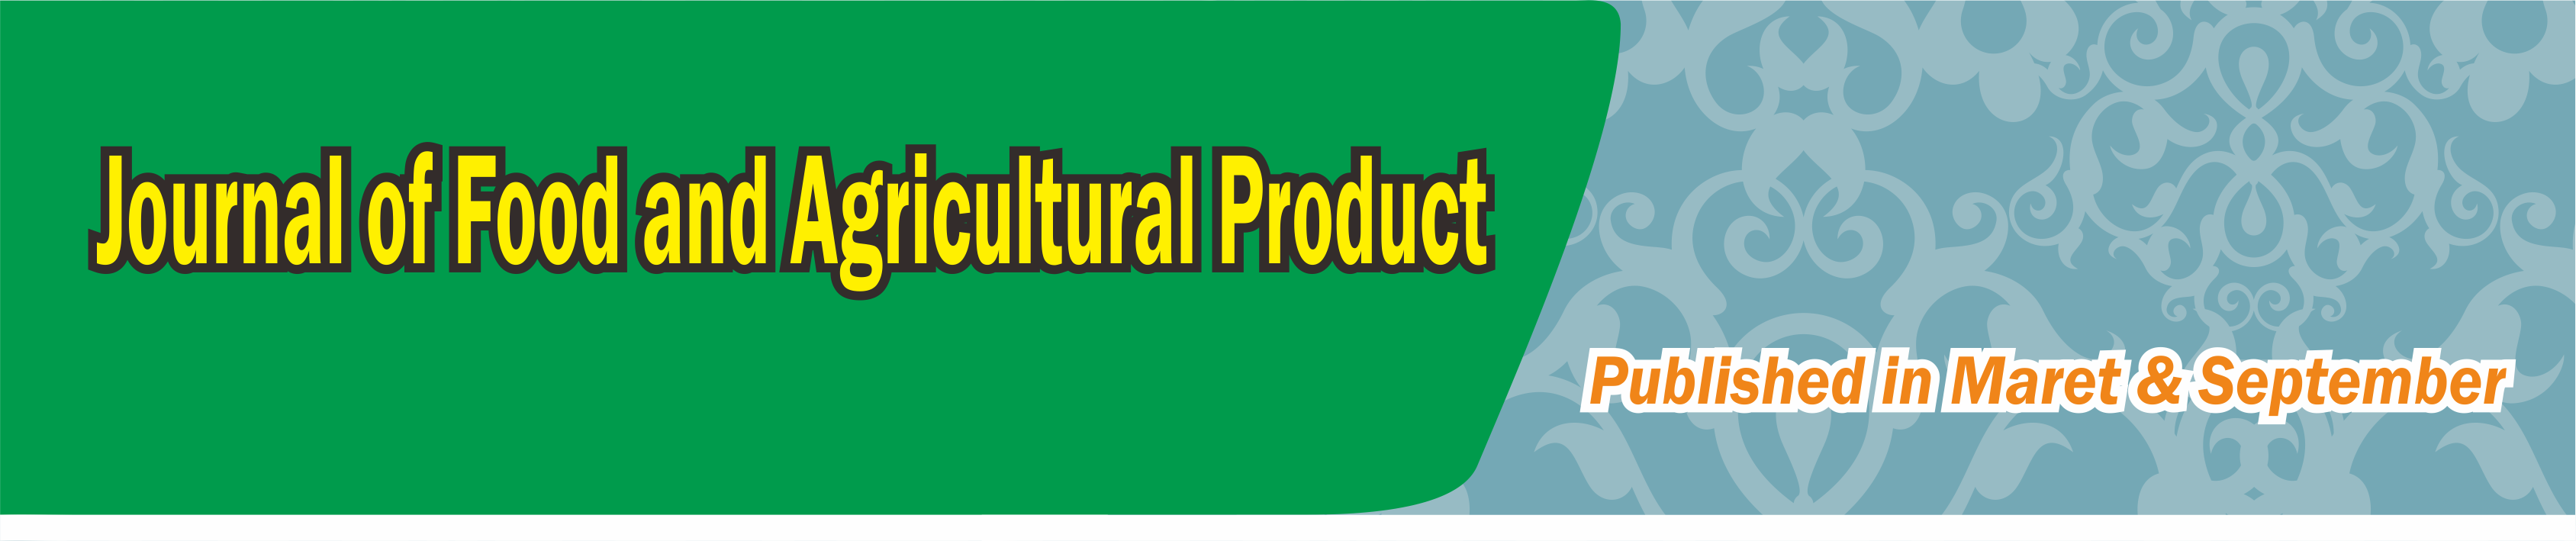 Journal of Food and Agricultural Product